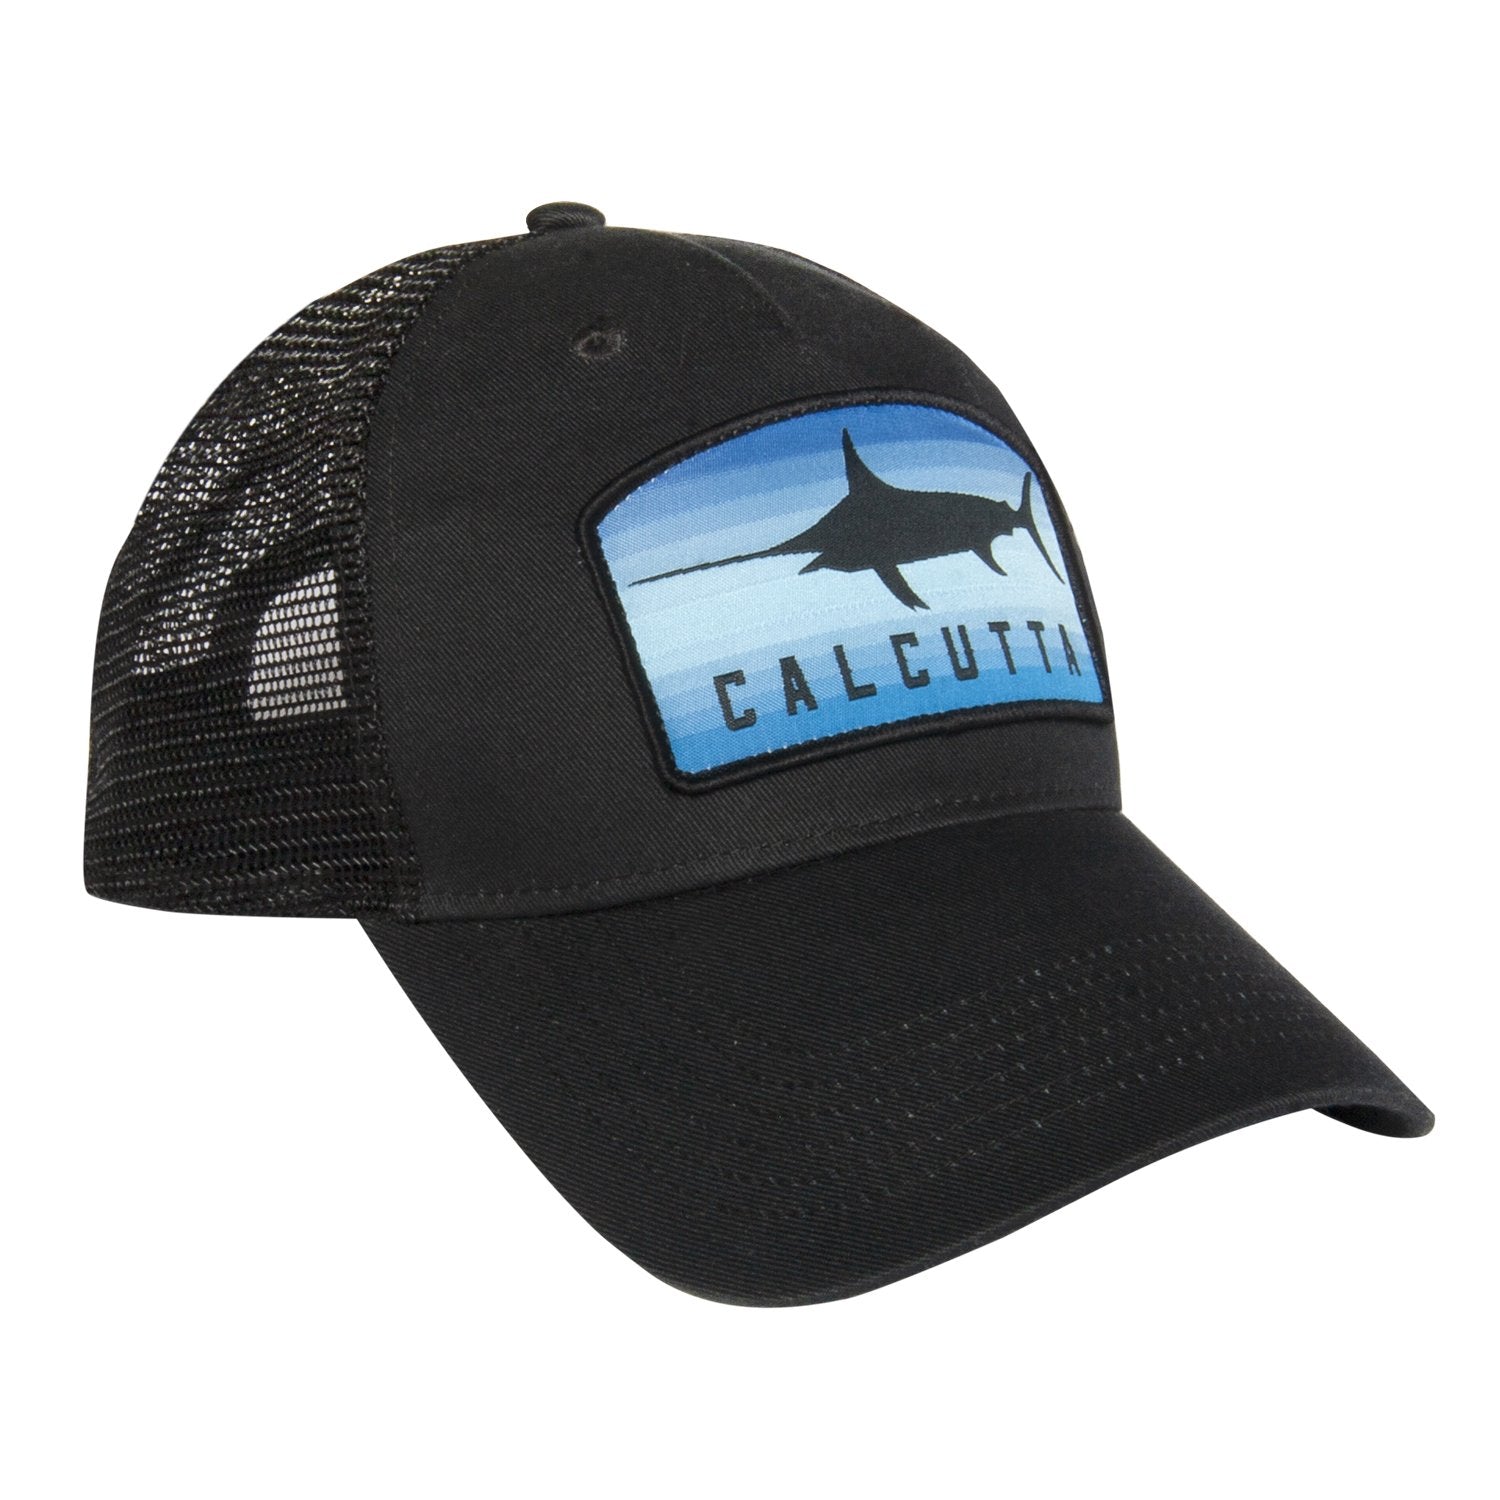 Capt Harry's Sailfish Low Profile Performance Hat Small Fit